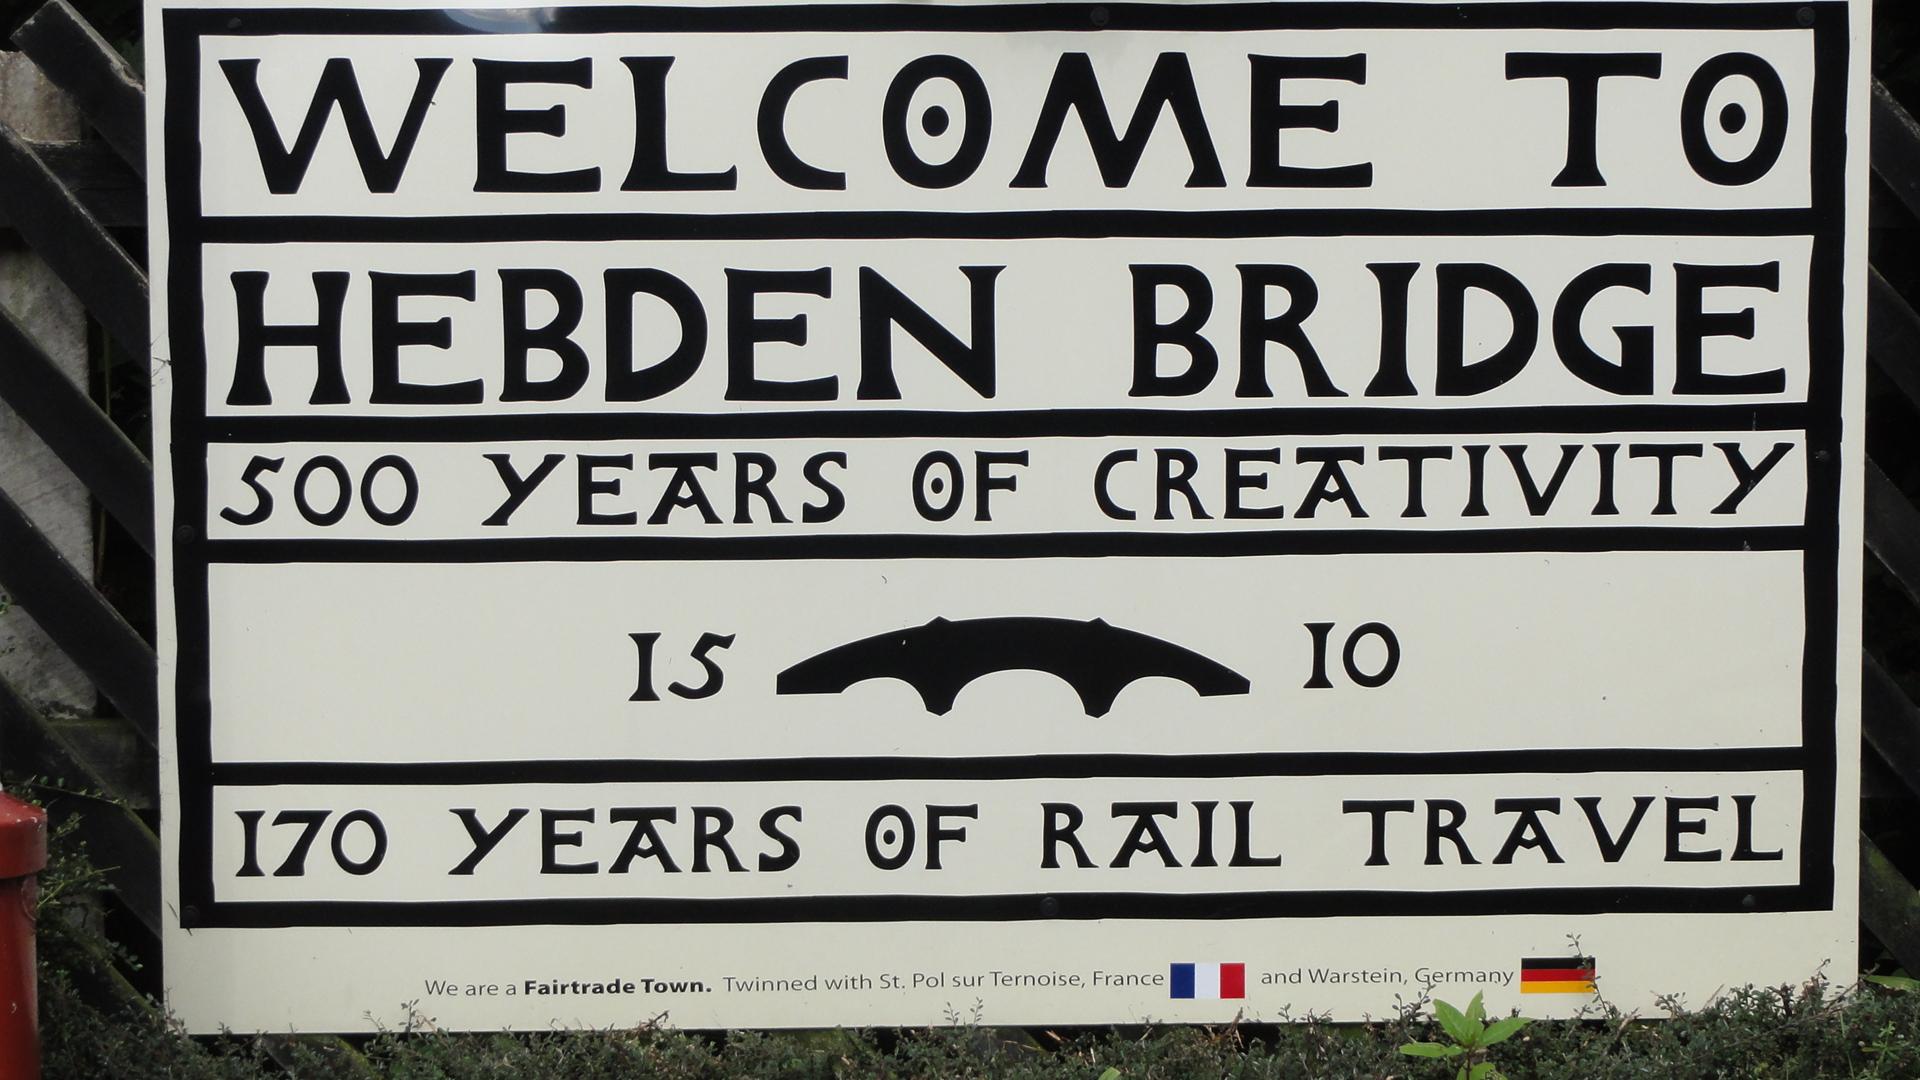 The Welcome sign outside the station